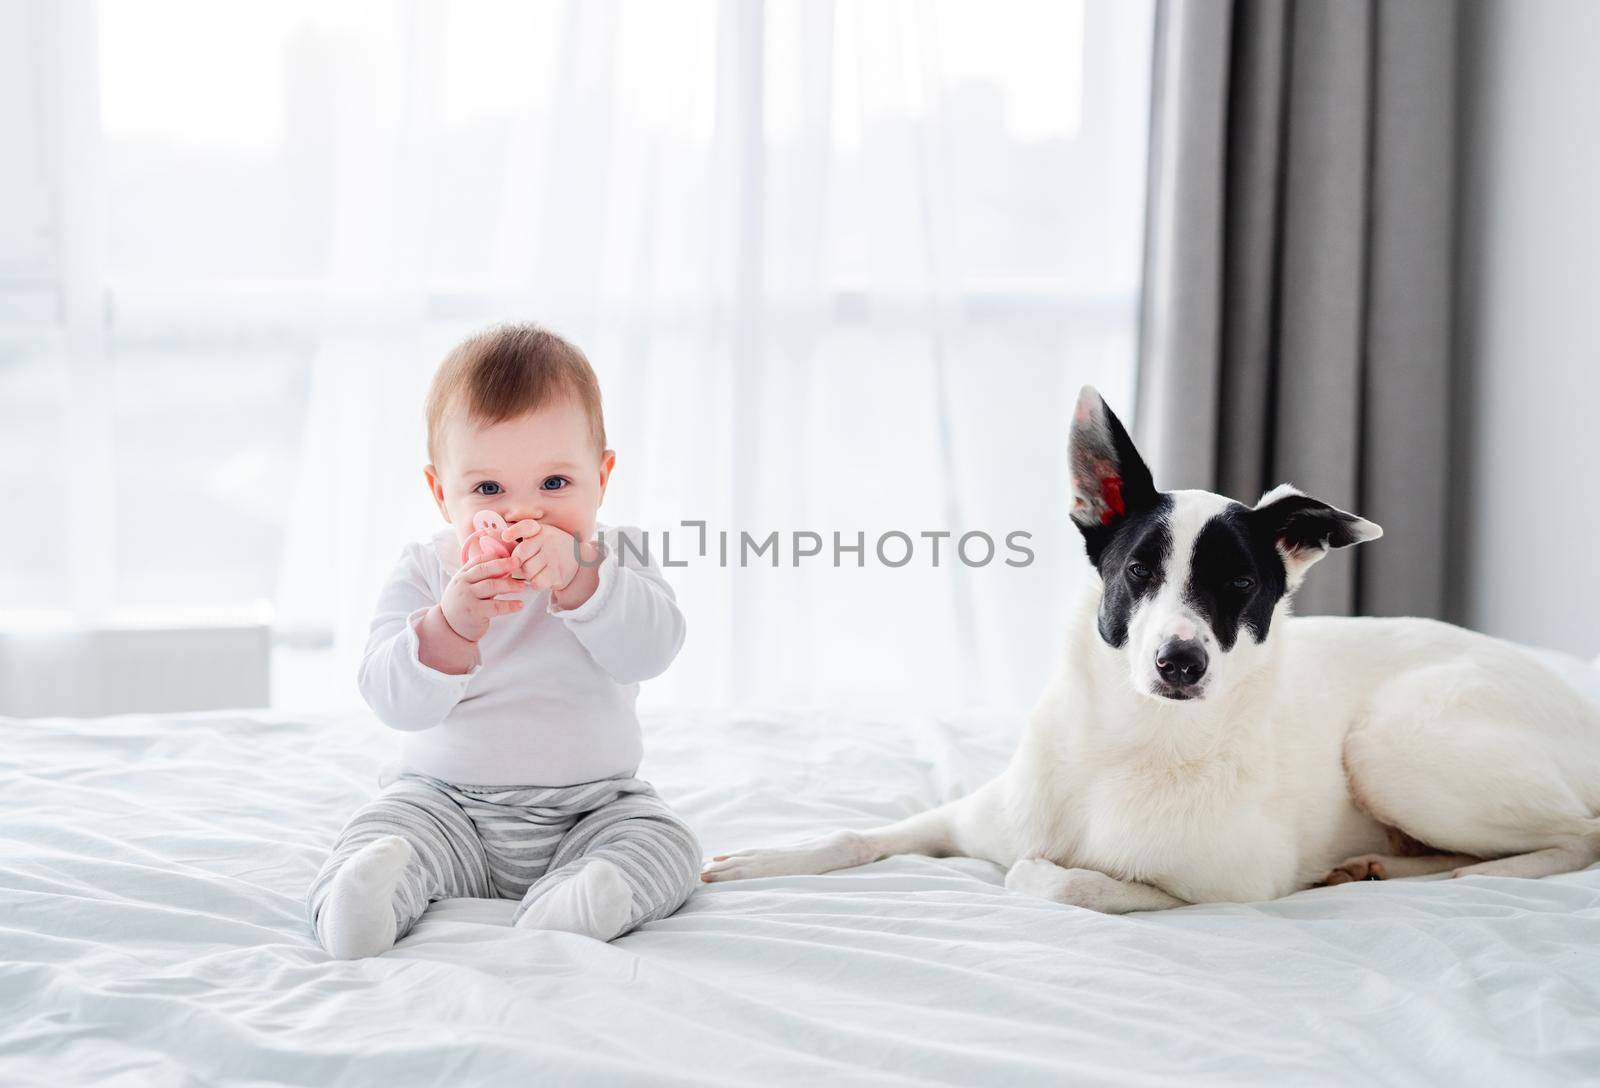 Child with dog in the bed by tan4ikk1